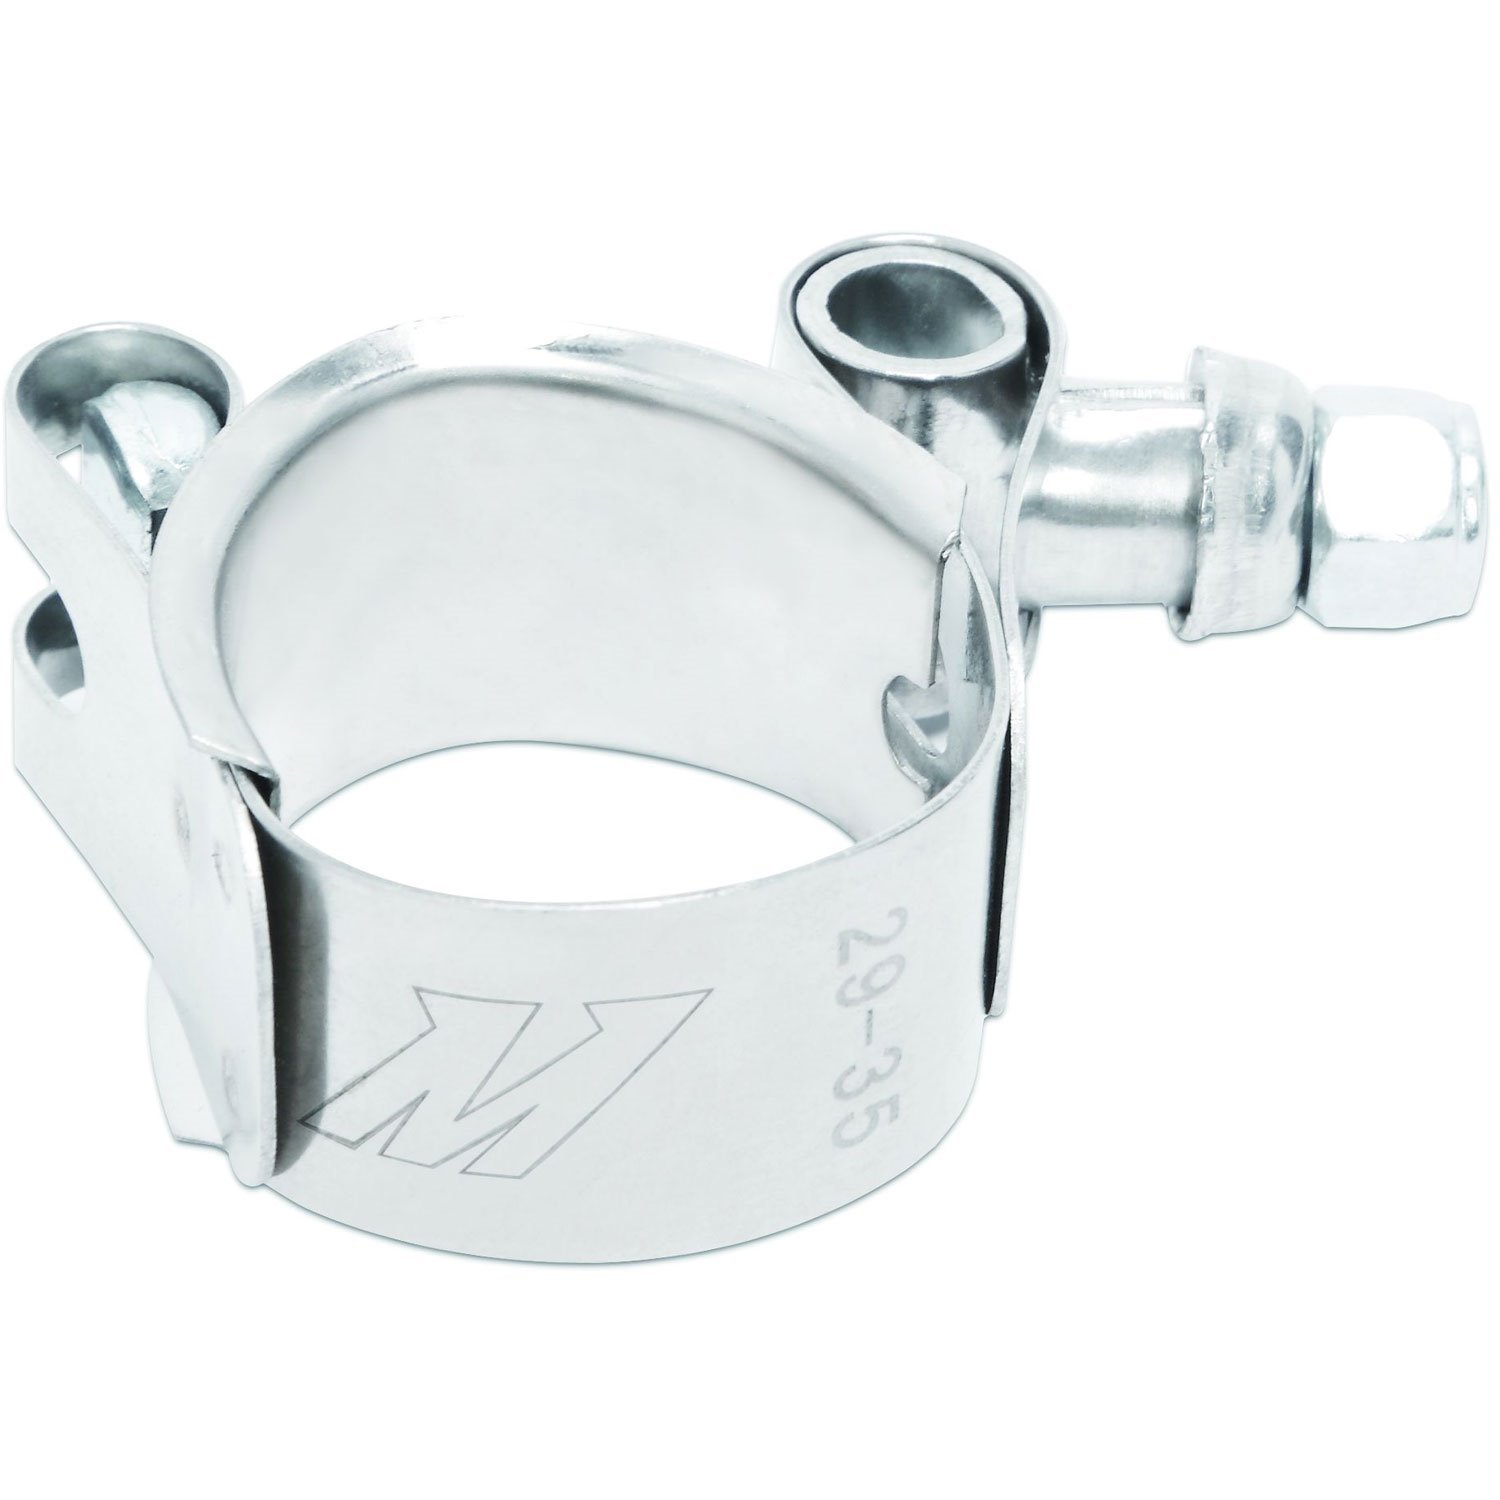 1.25" T-Bolt Hose Clamp 1.14" (29mm) to 1.37" (35mm) Clamping Range